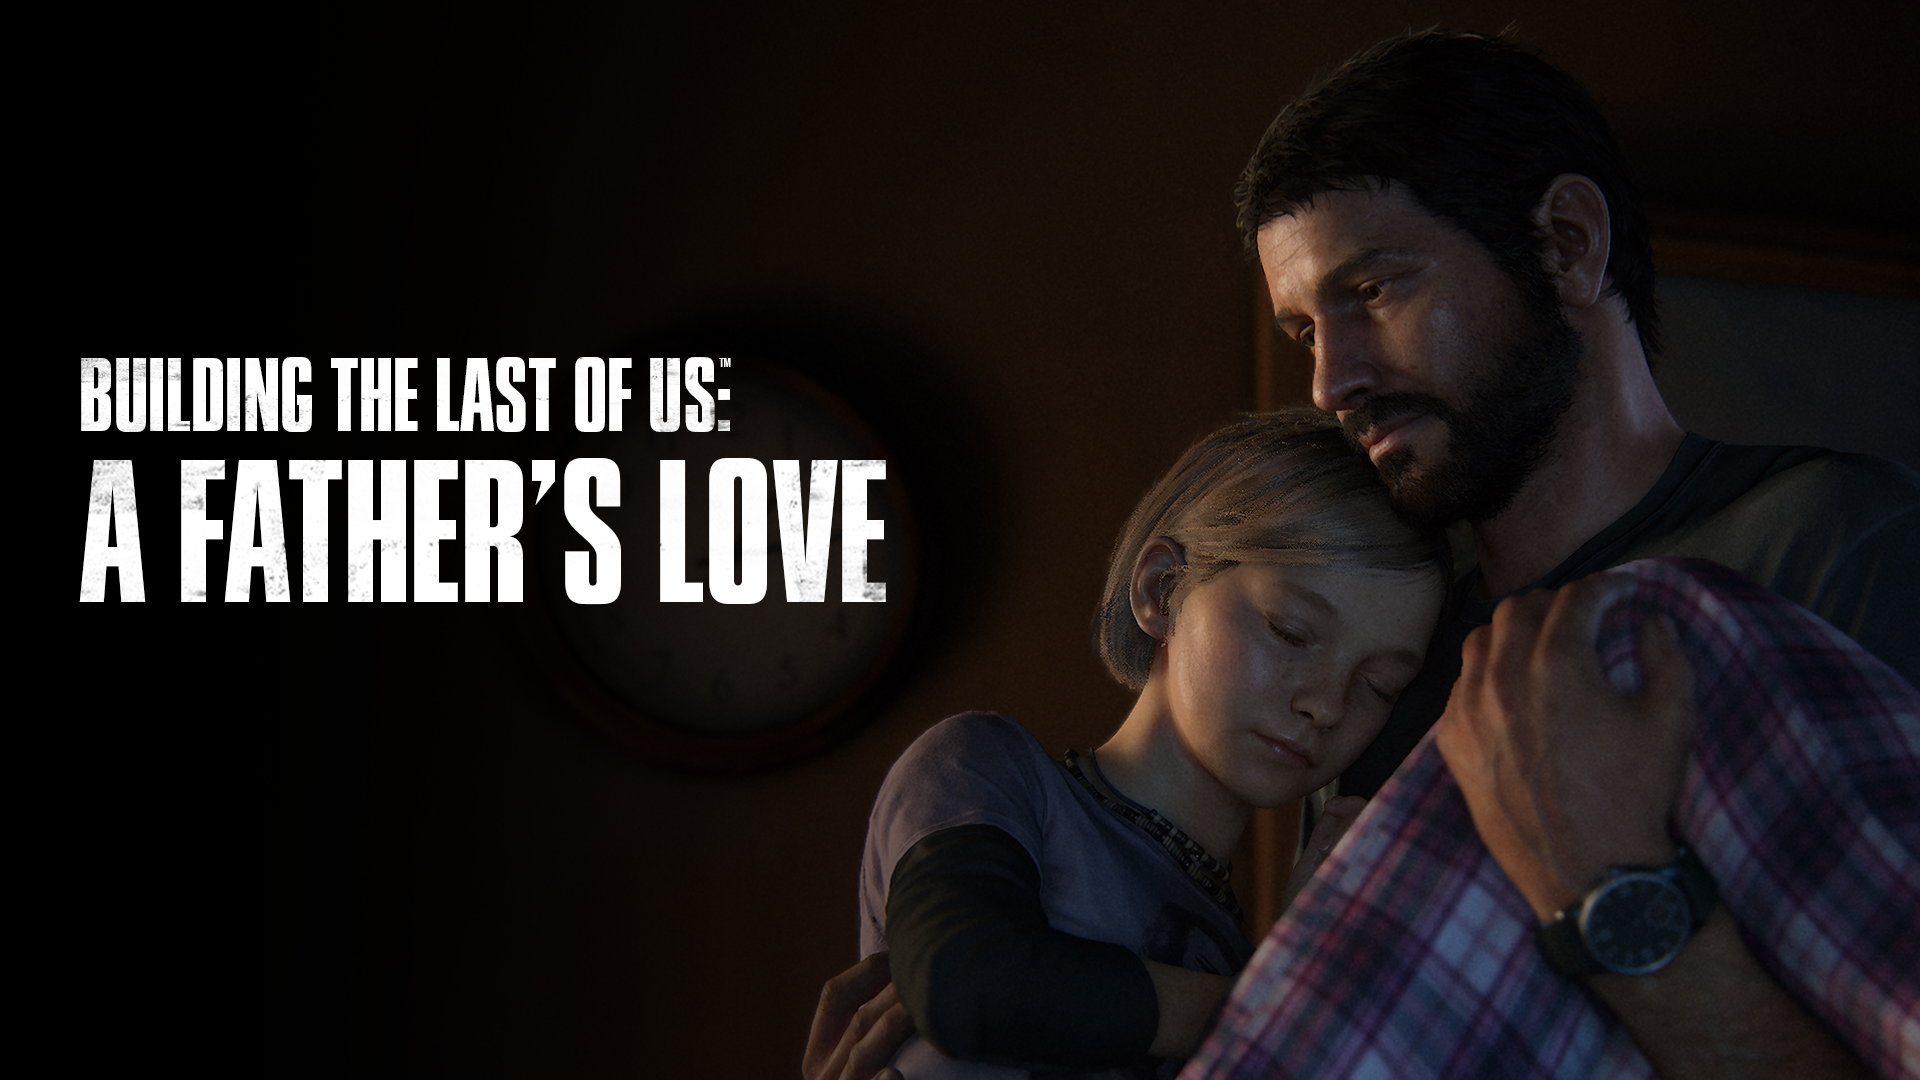 A Father's Love - Building The Last of Us Episode 1